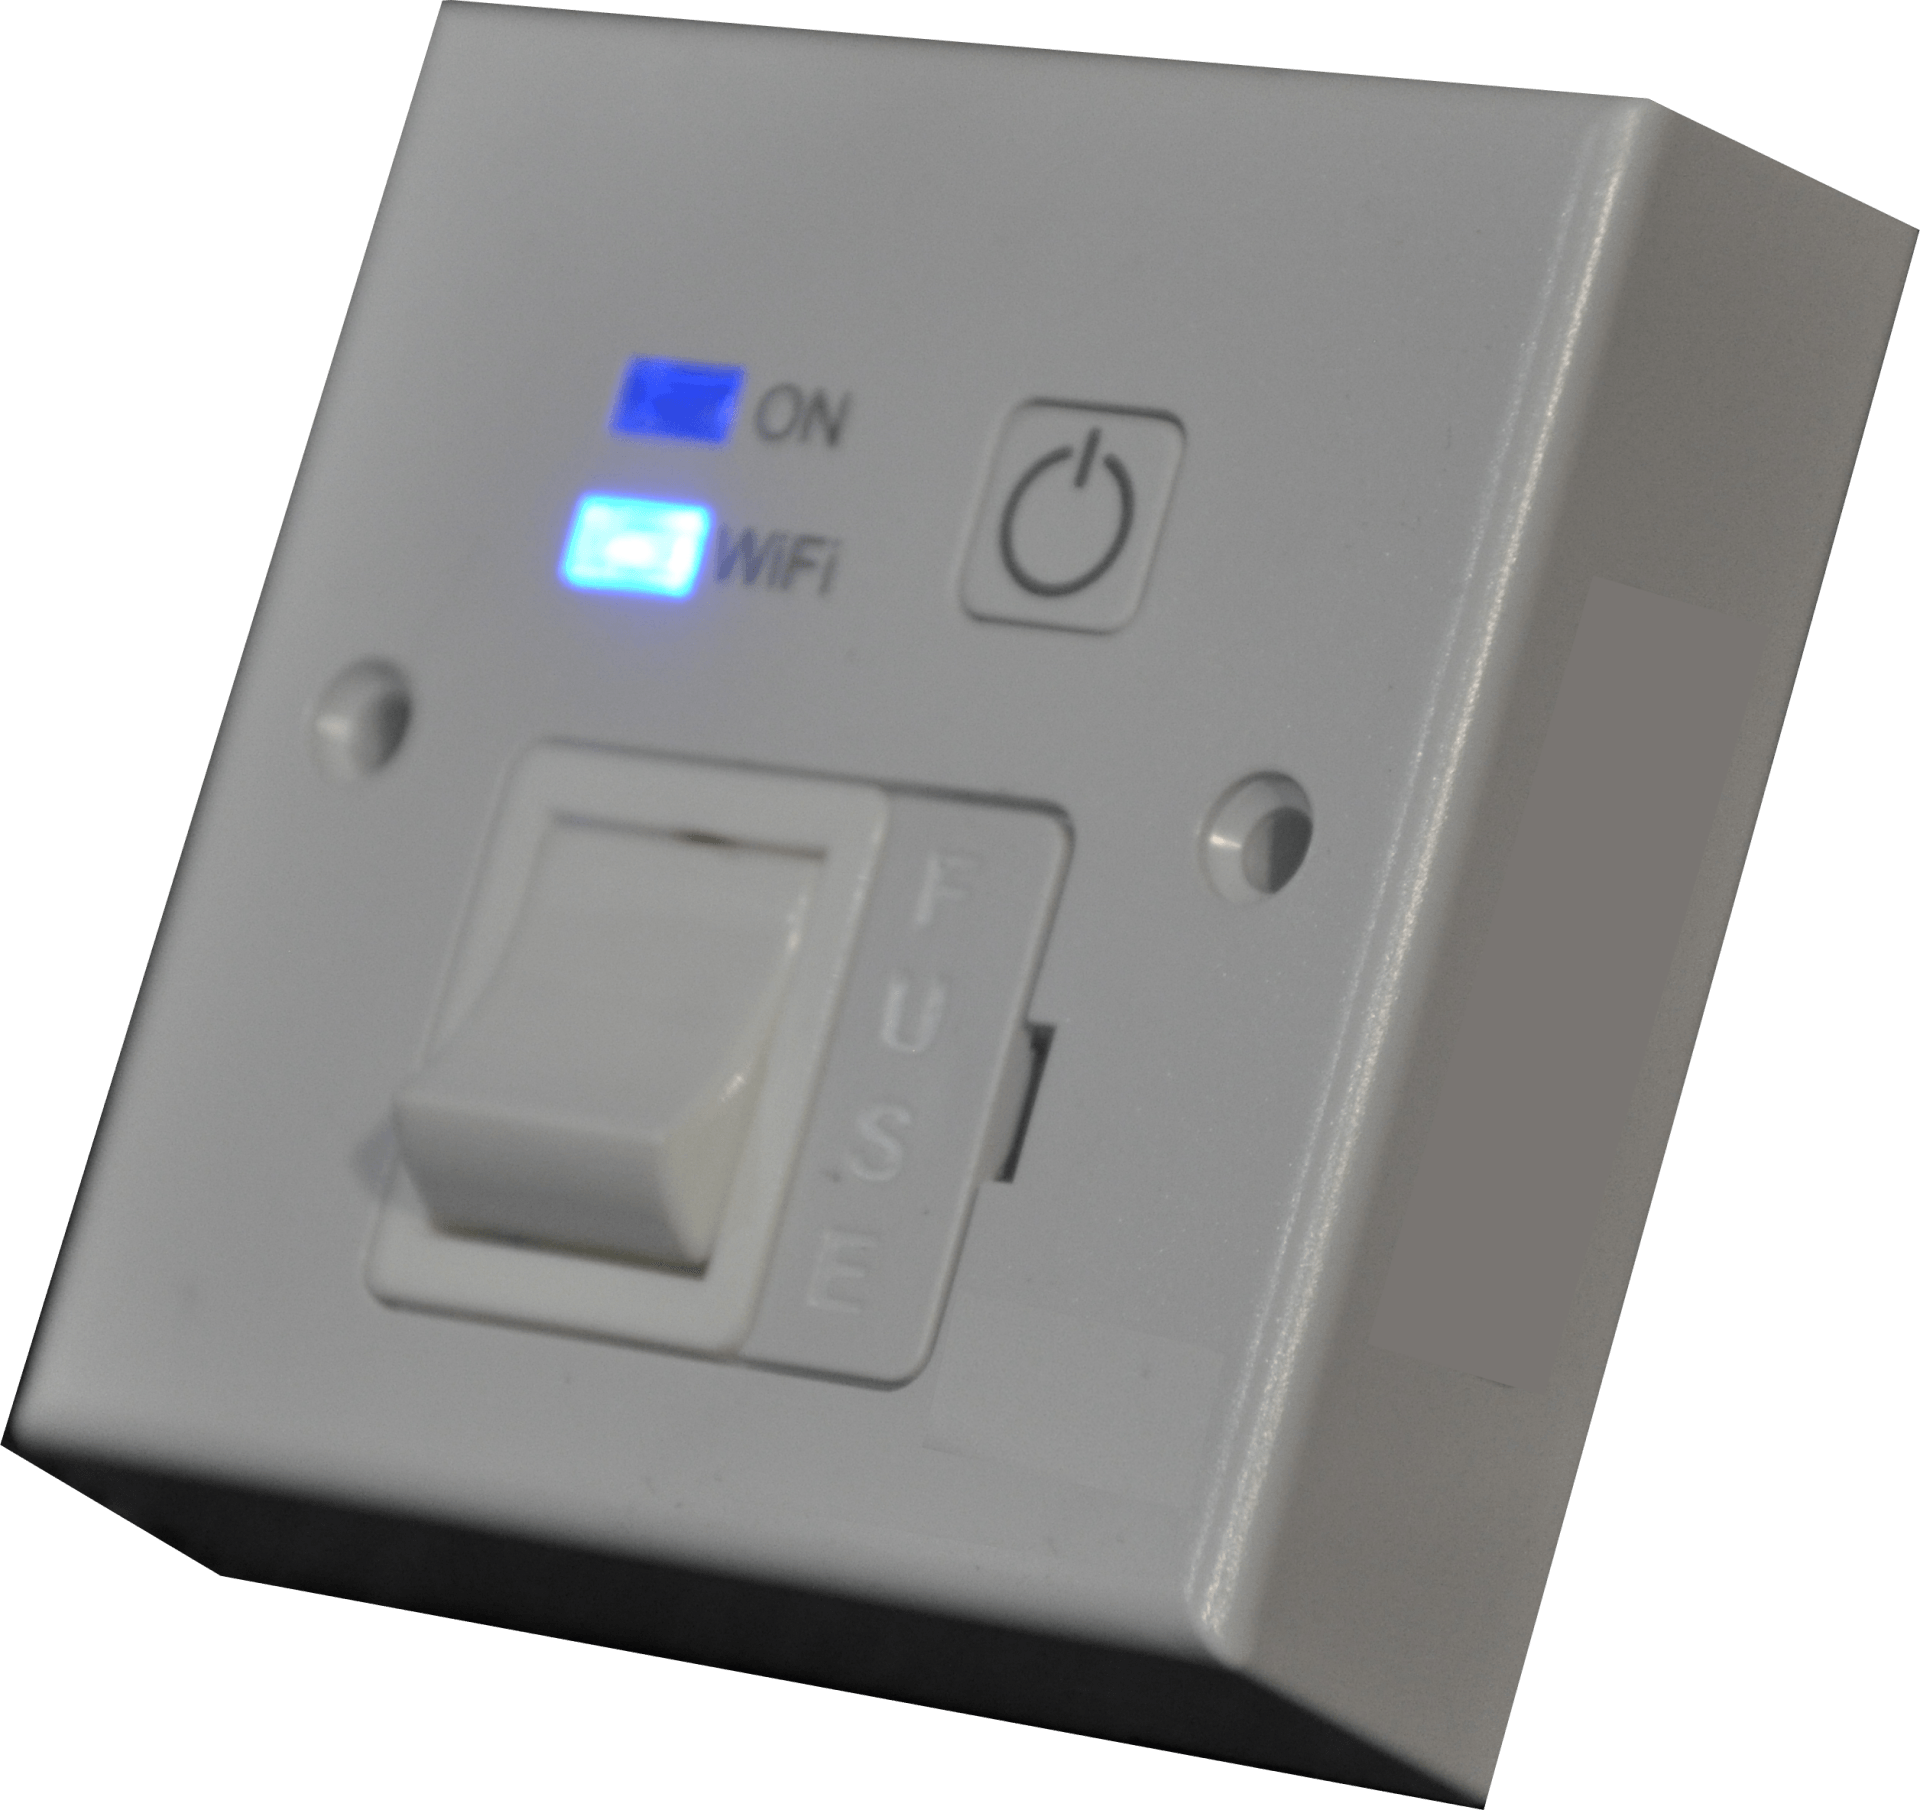 Interruttore timer Spur WiFi Victory Lighting